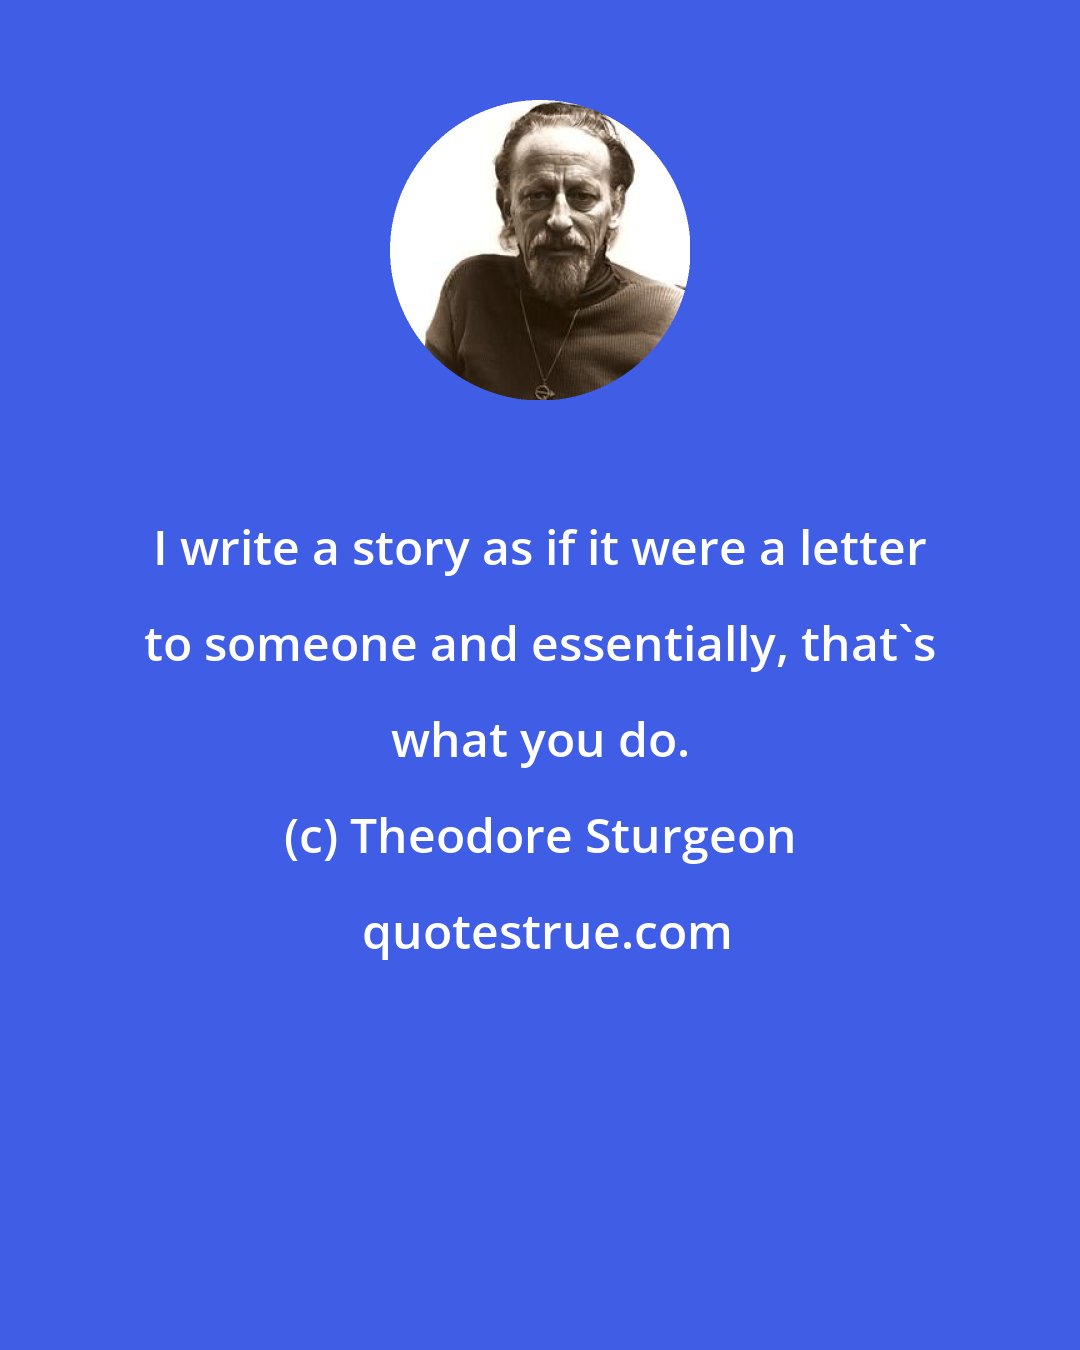 Theodore Sturgeon: I write a story as if it were a letter to someone and essentially, that's what you do.